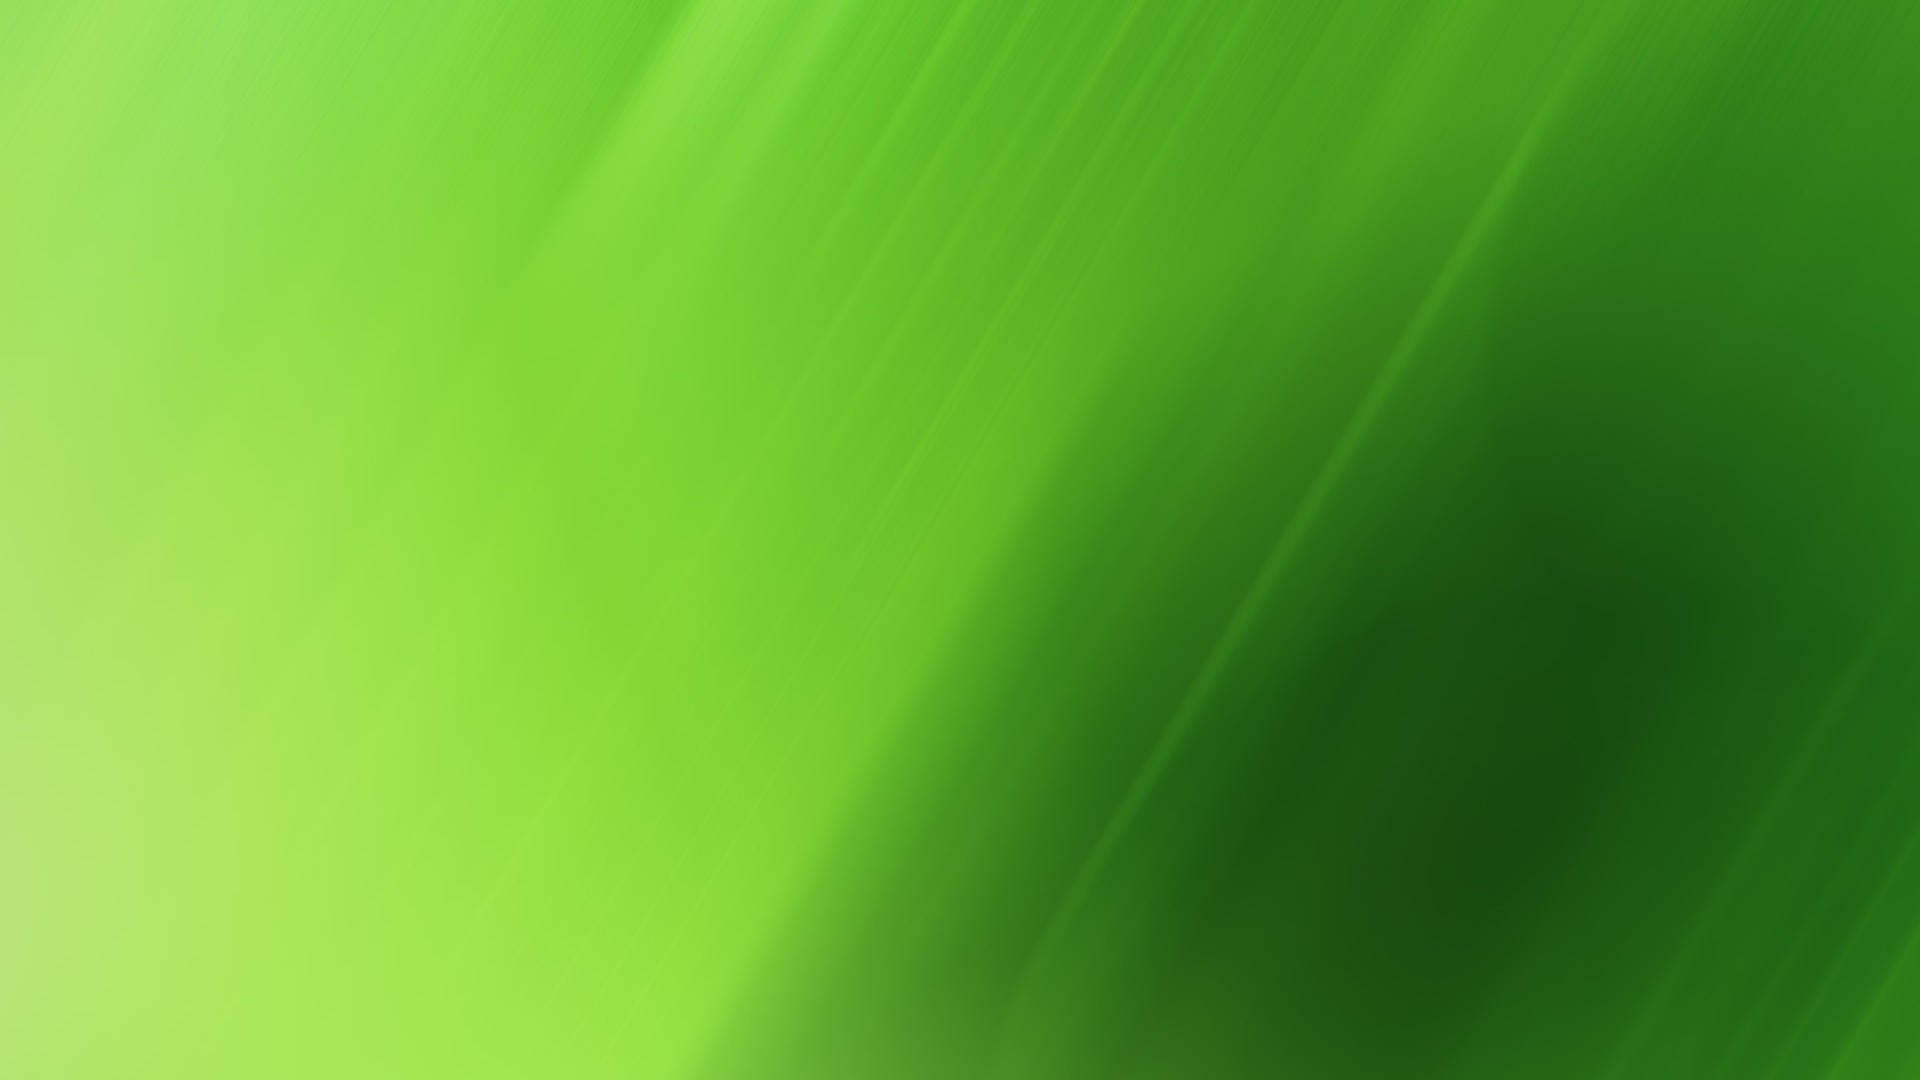 Shades Of Plain Green Background